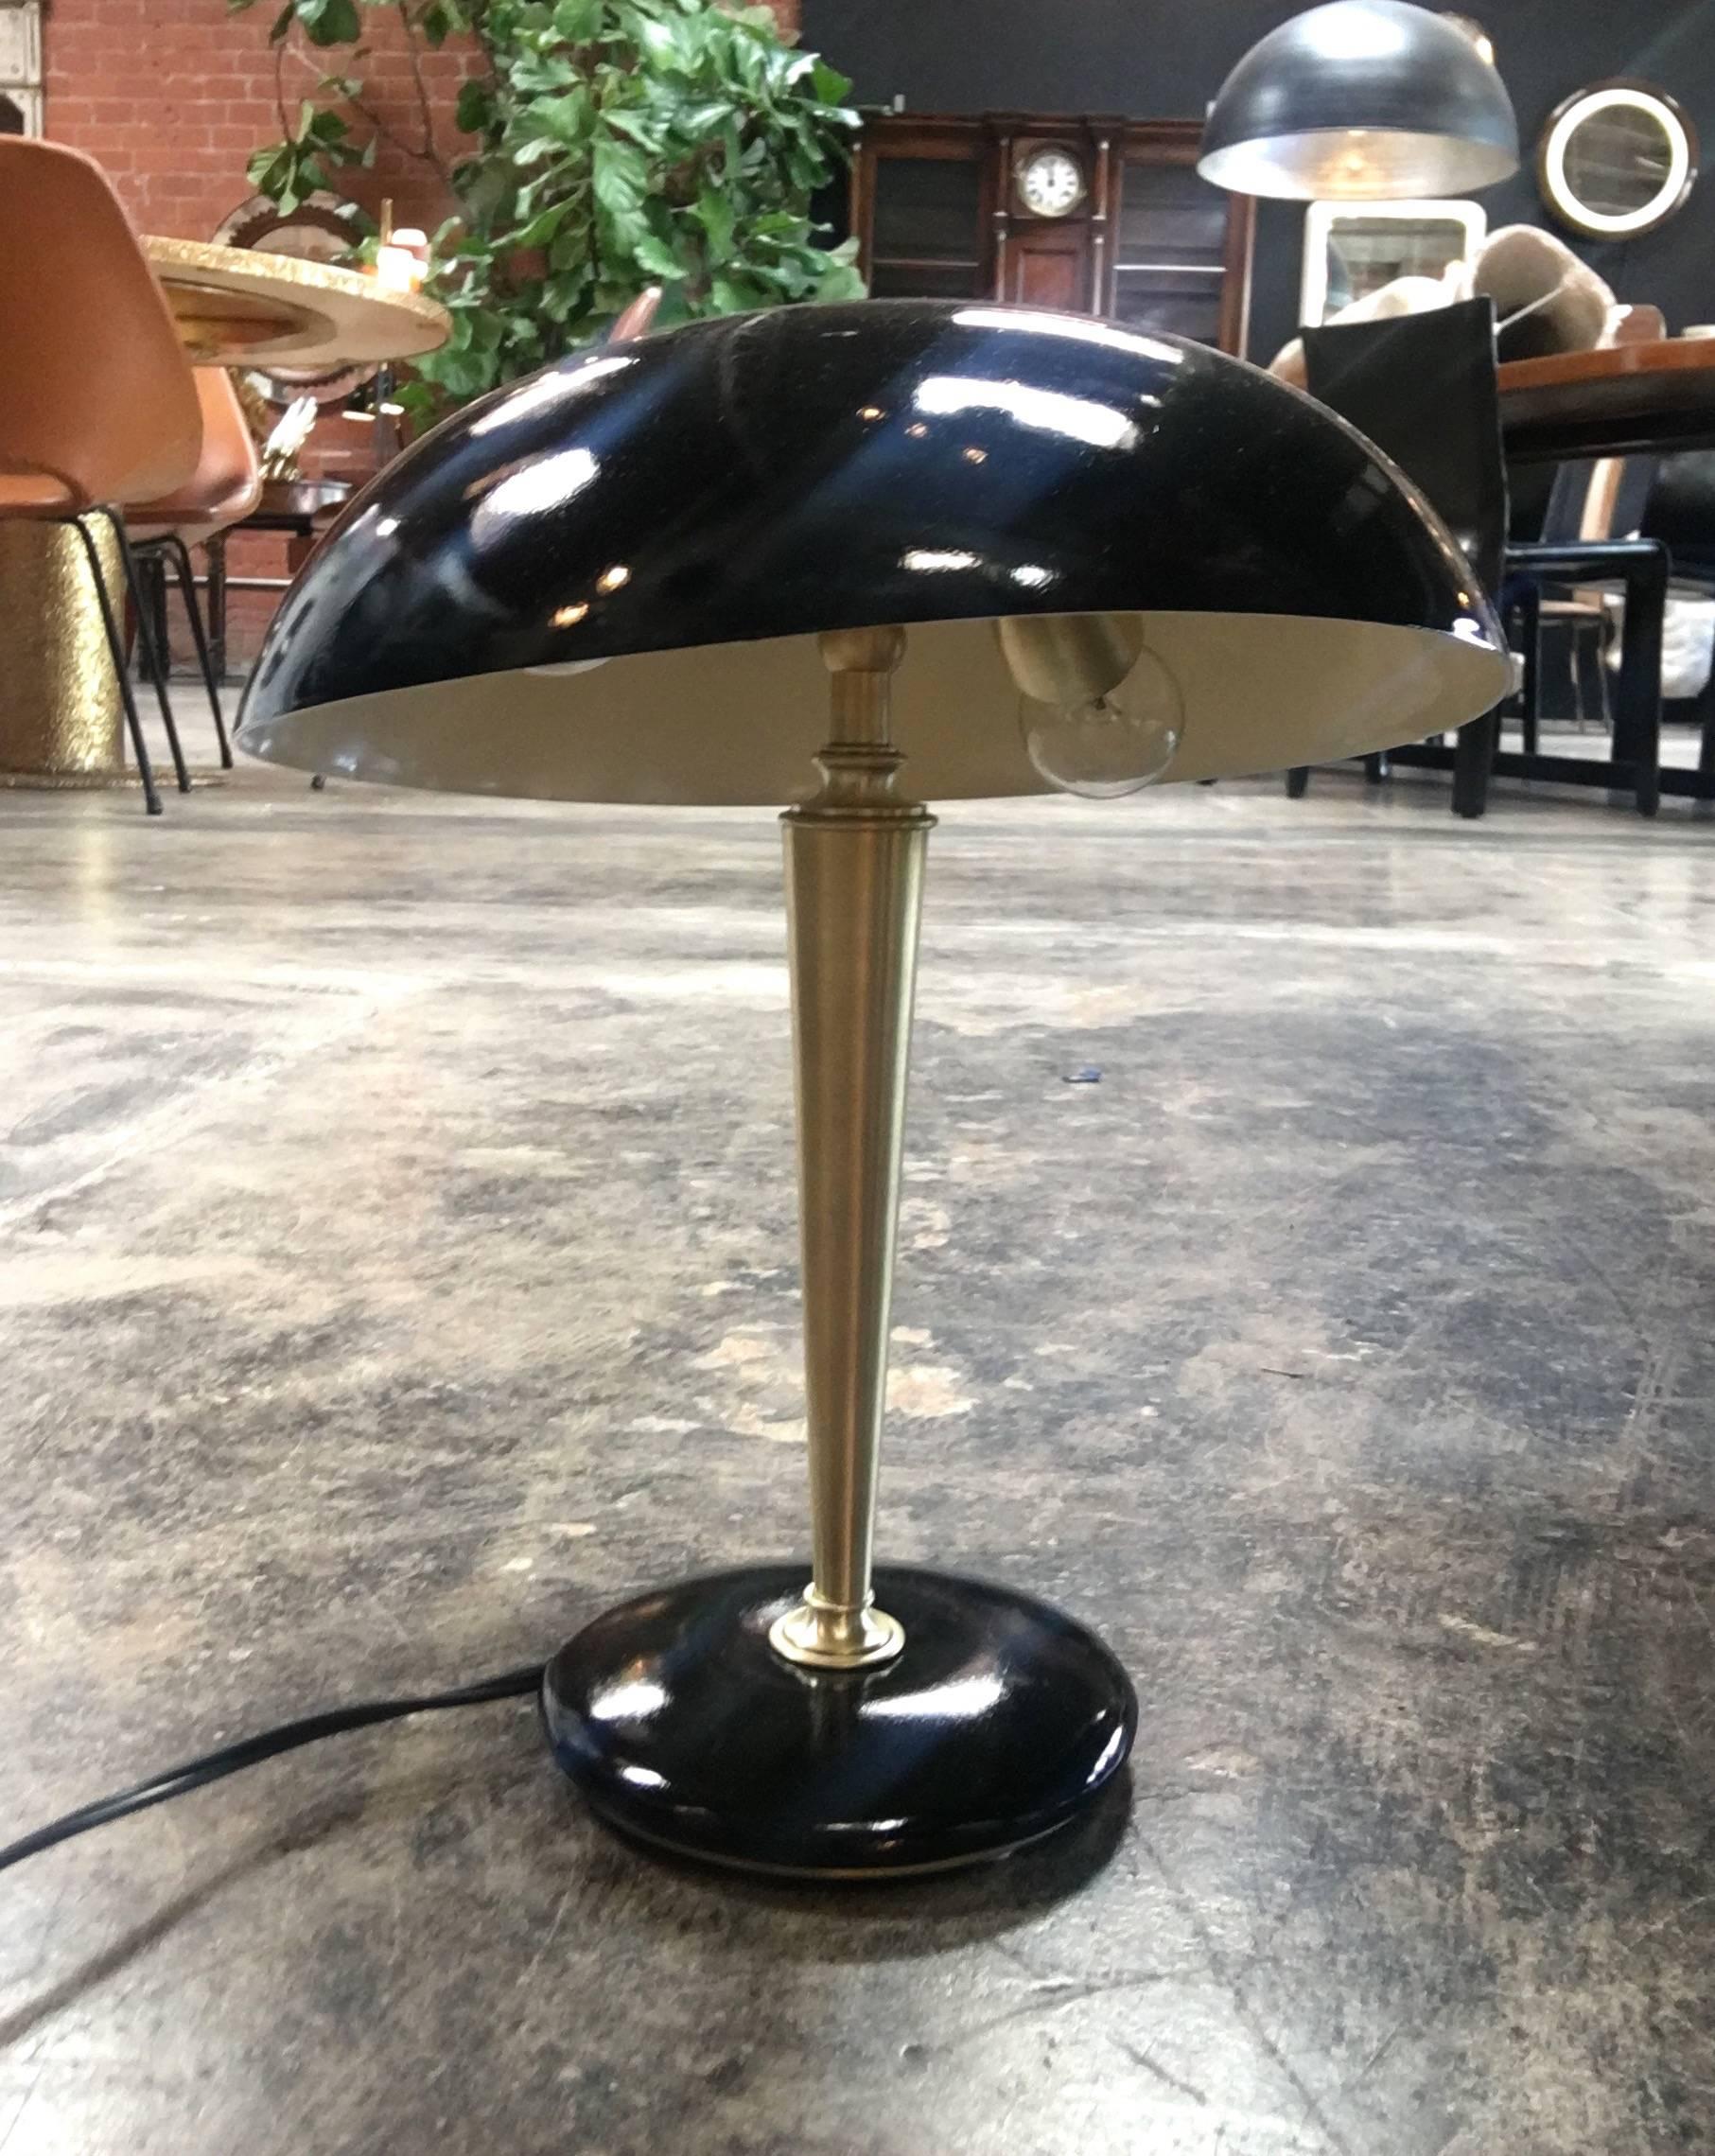 Vintage brass desk lamp with a dark metal dome